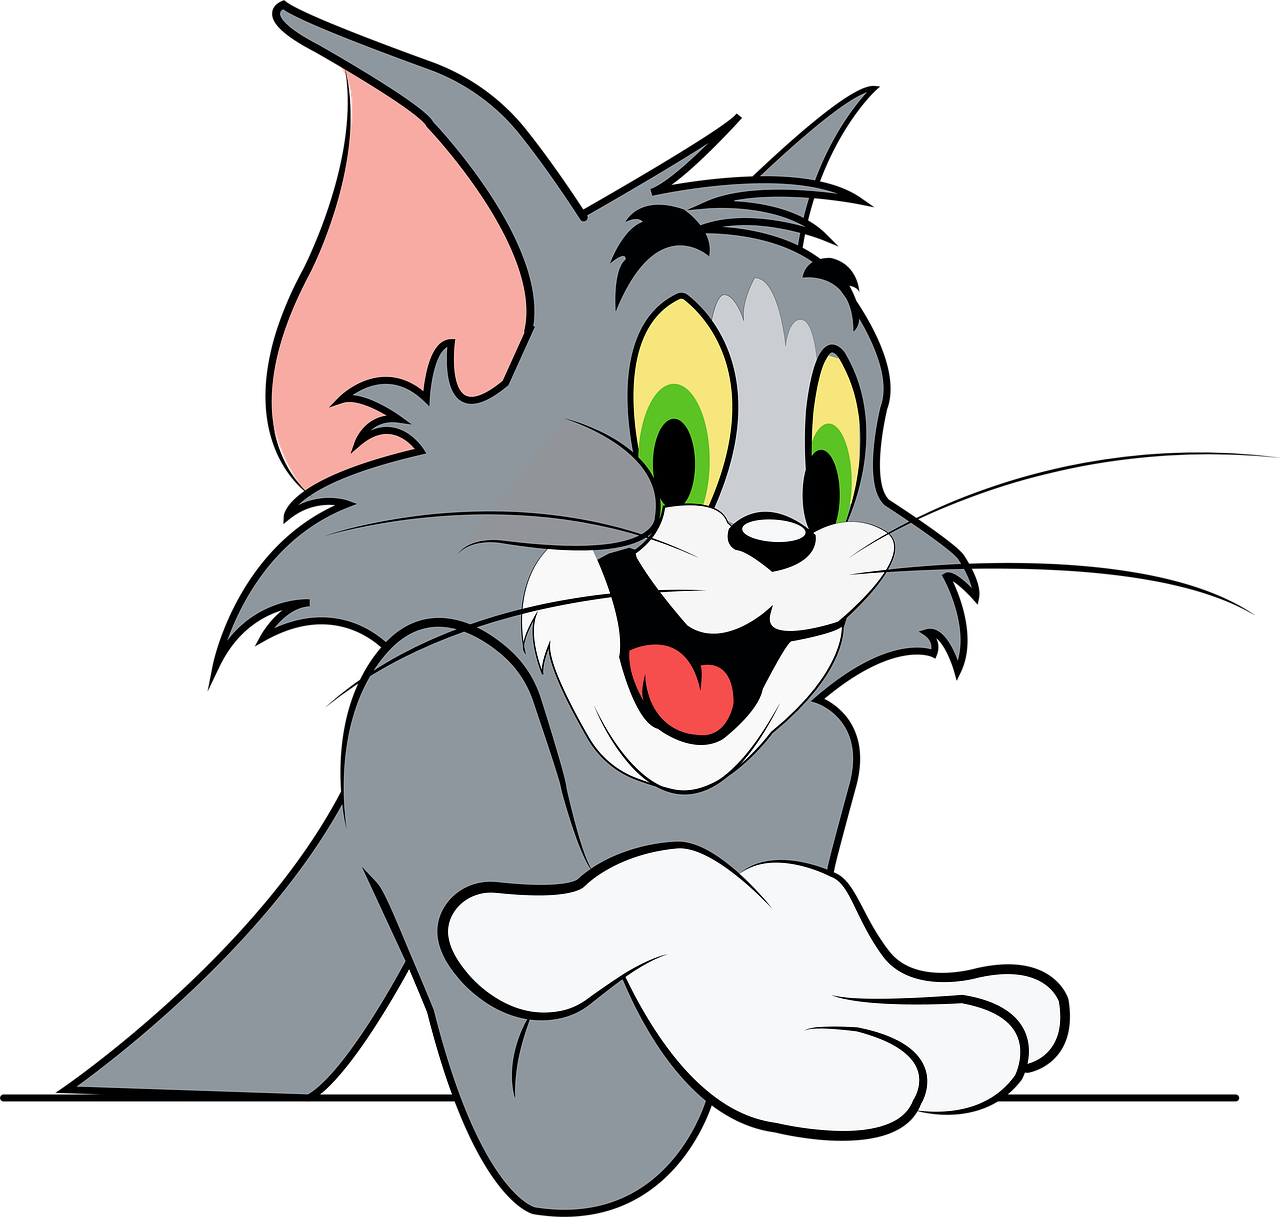 Sit tom. Tom and Jerry. Кот том и Джерри. Tom from Tom and Jerry.